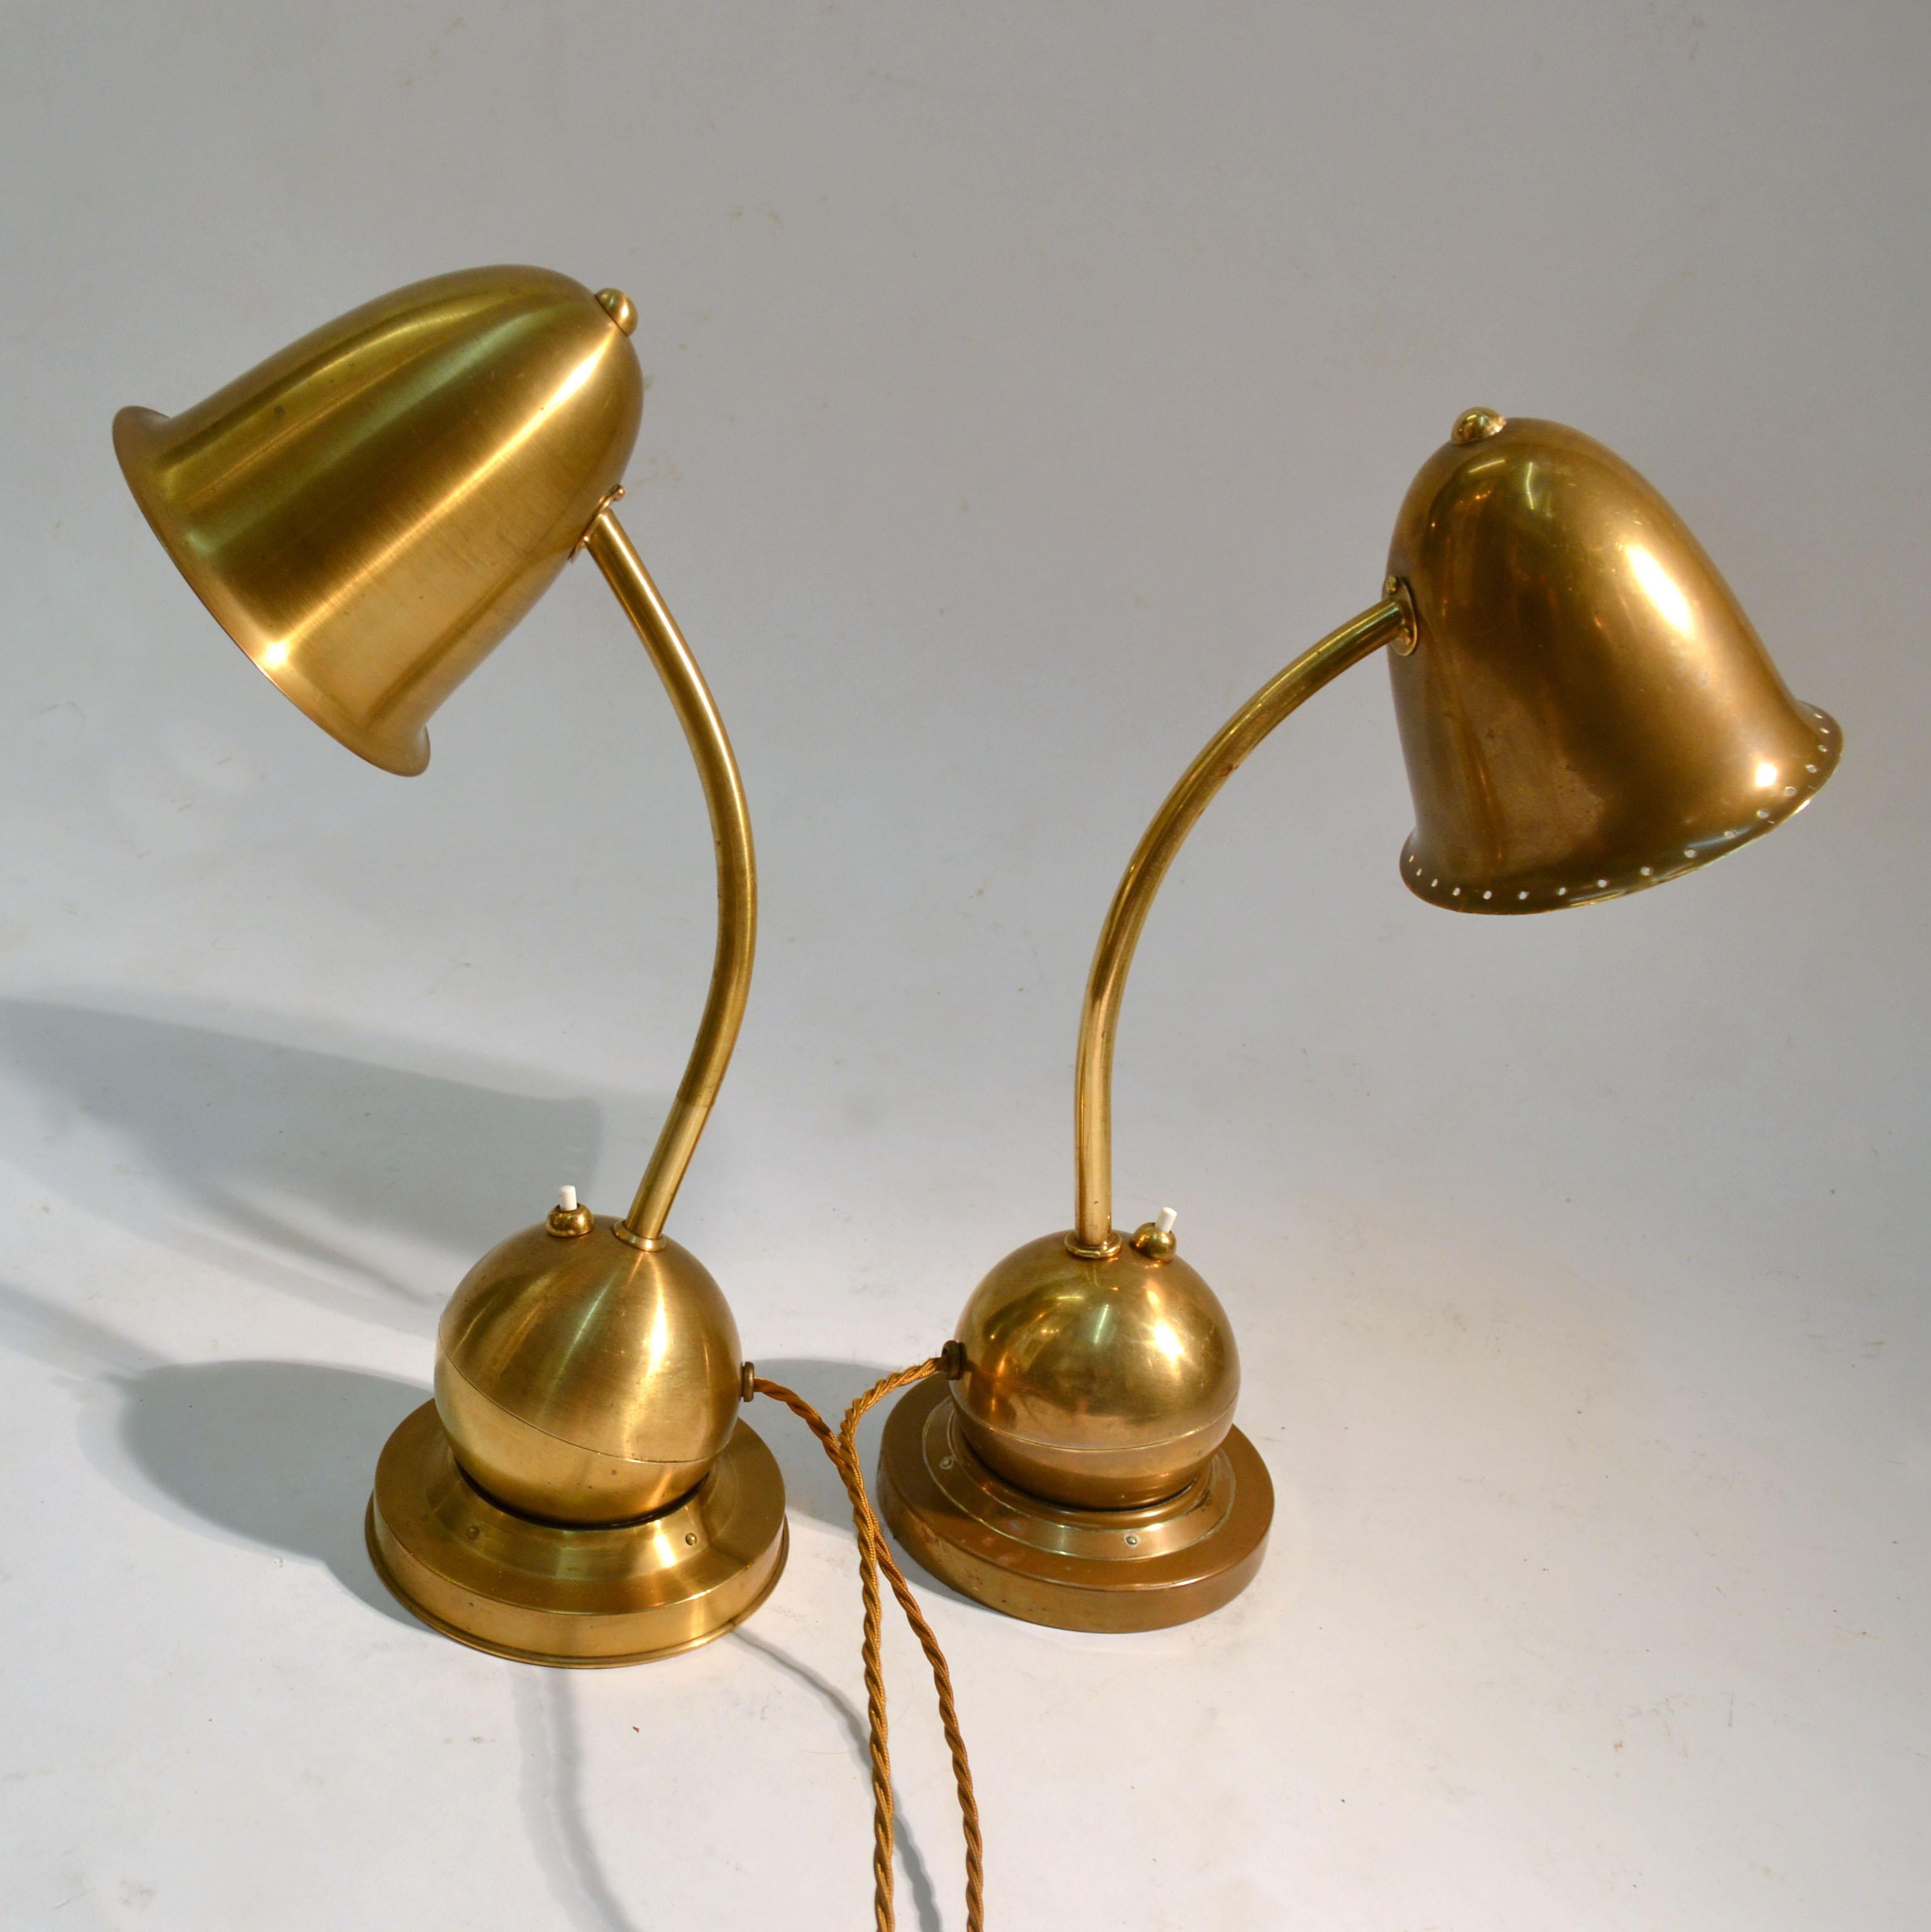 Dutch Pair of Modernist Brass Table / Desk Lamps 1930s Lamps by Daalderop Netherlands